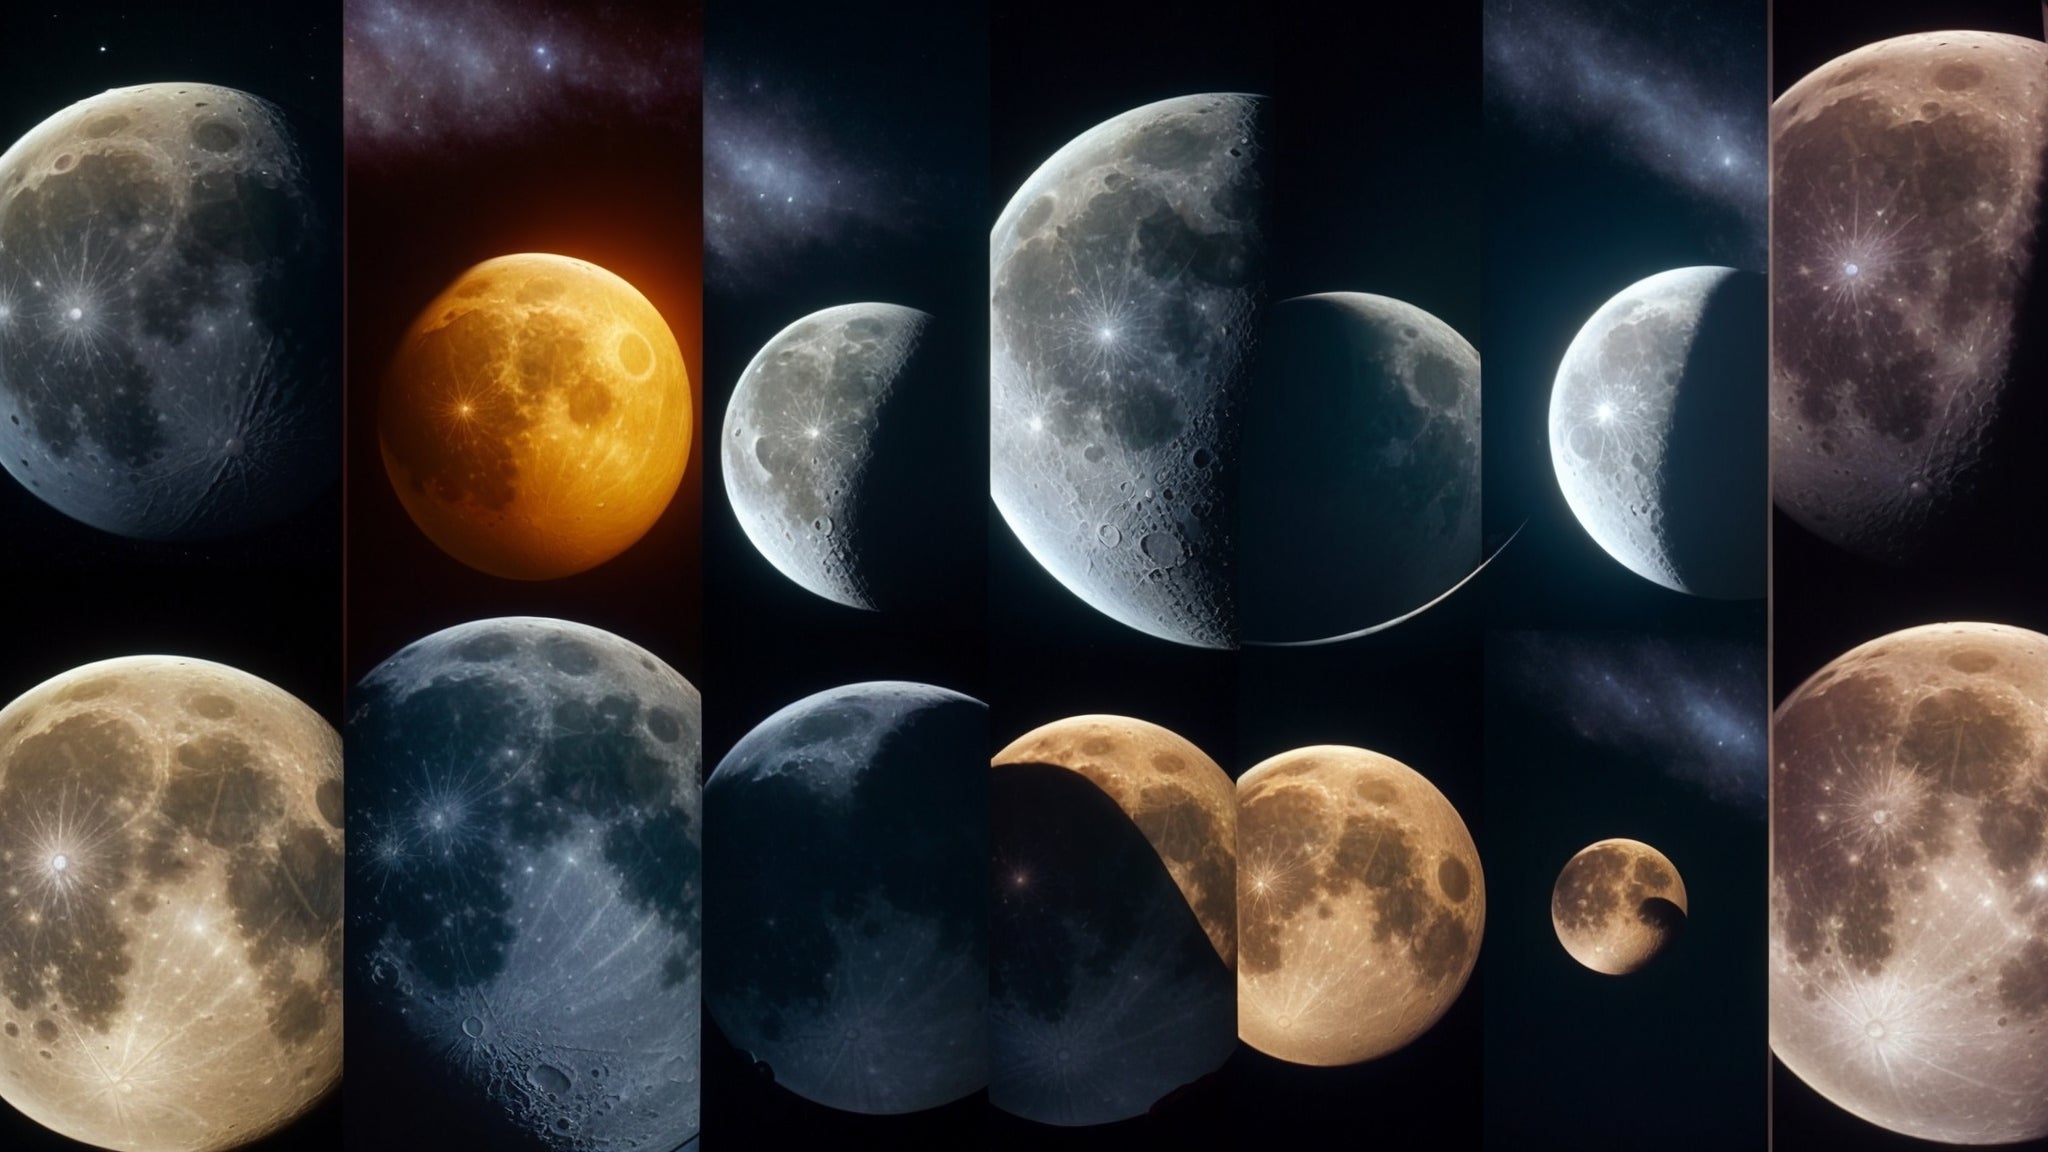 A picture of the moon phases with all phases of the moon shown